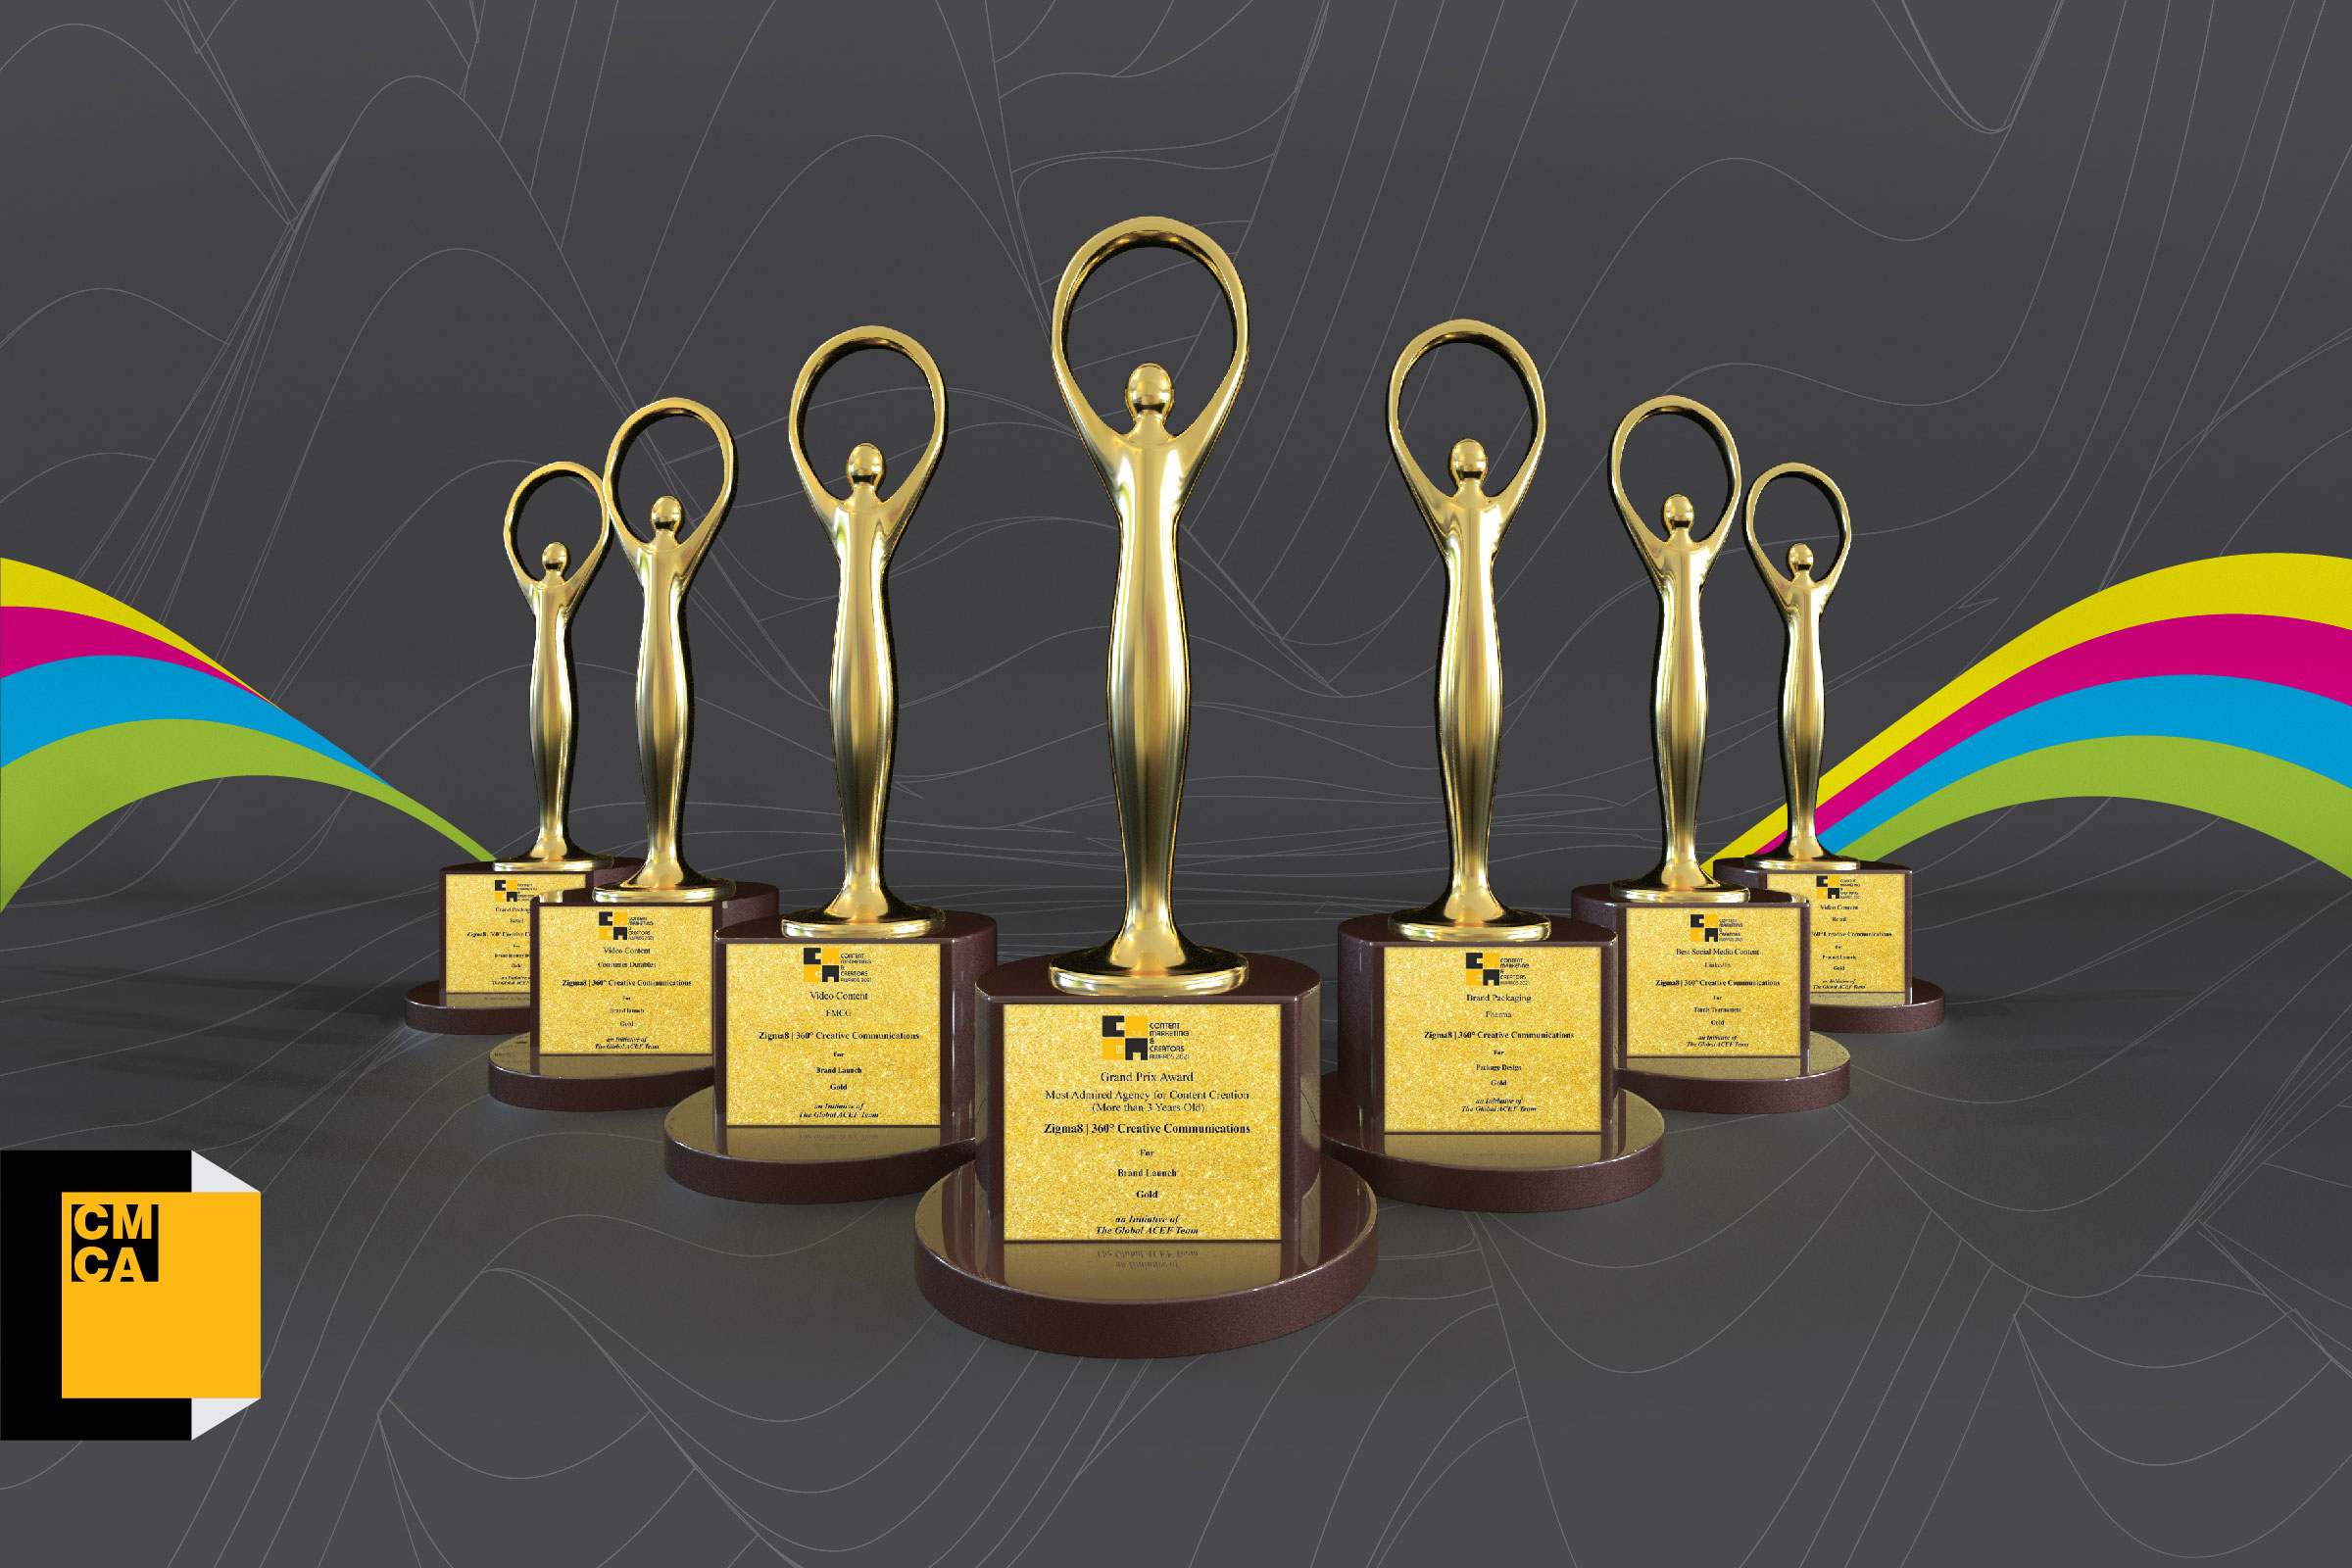 Zigma8 won a total of 7 gold awards at the Content Marketing Creators Awards 2021 (CMCA)